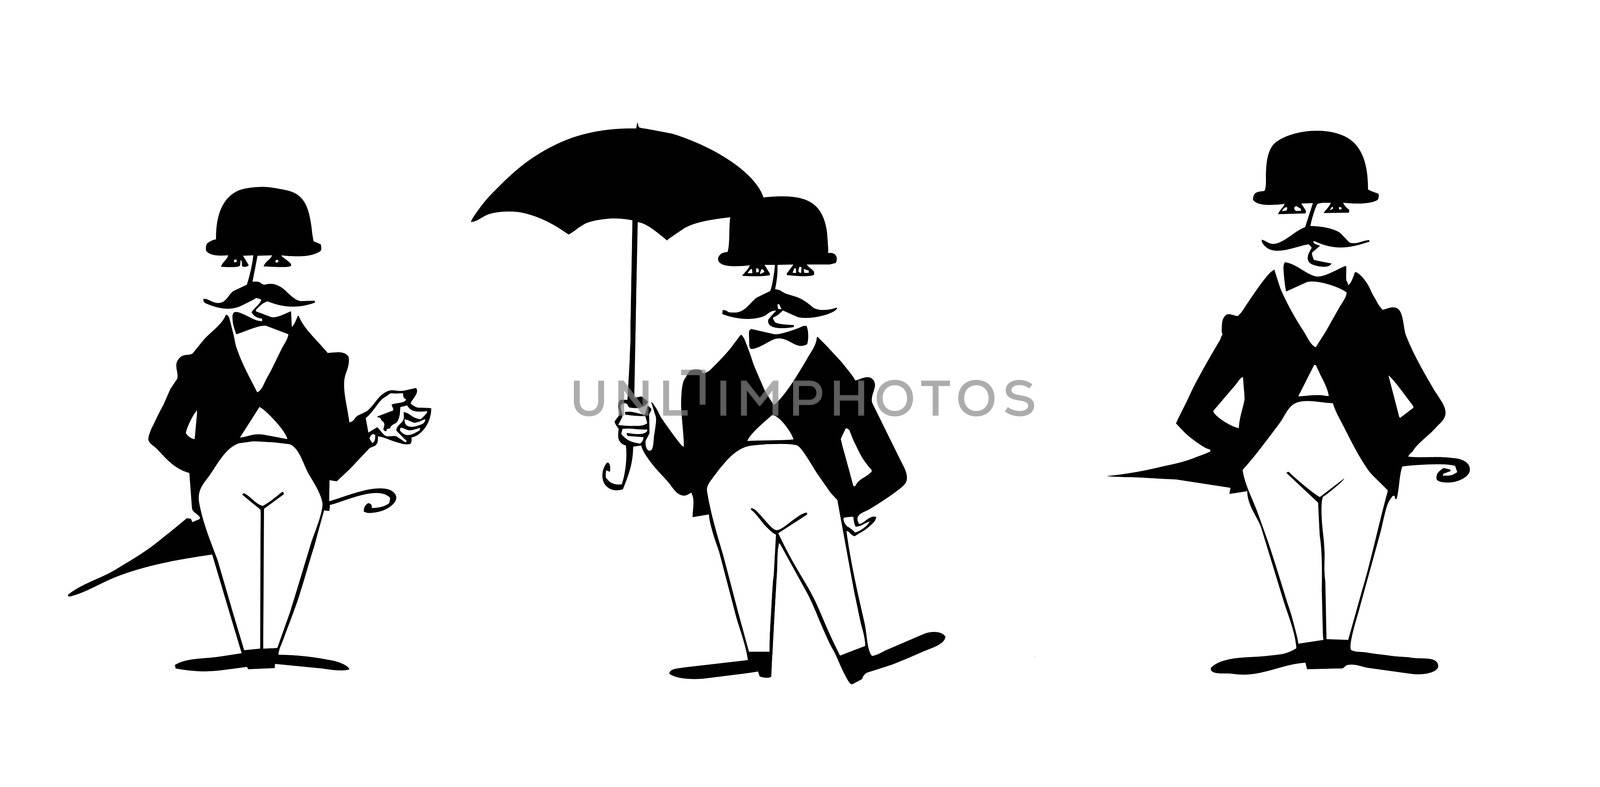 vector drawing of the gentleman on white background by basel101658